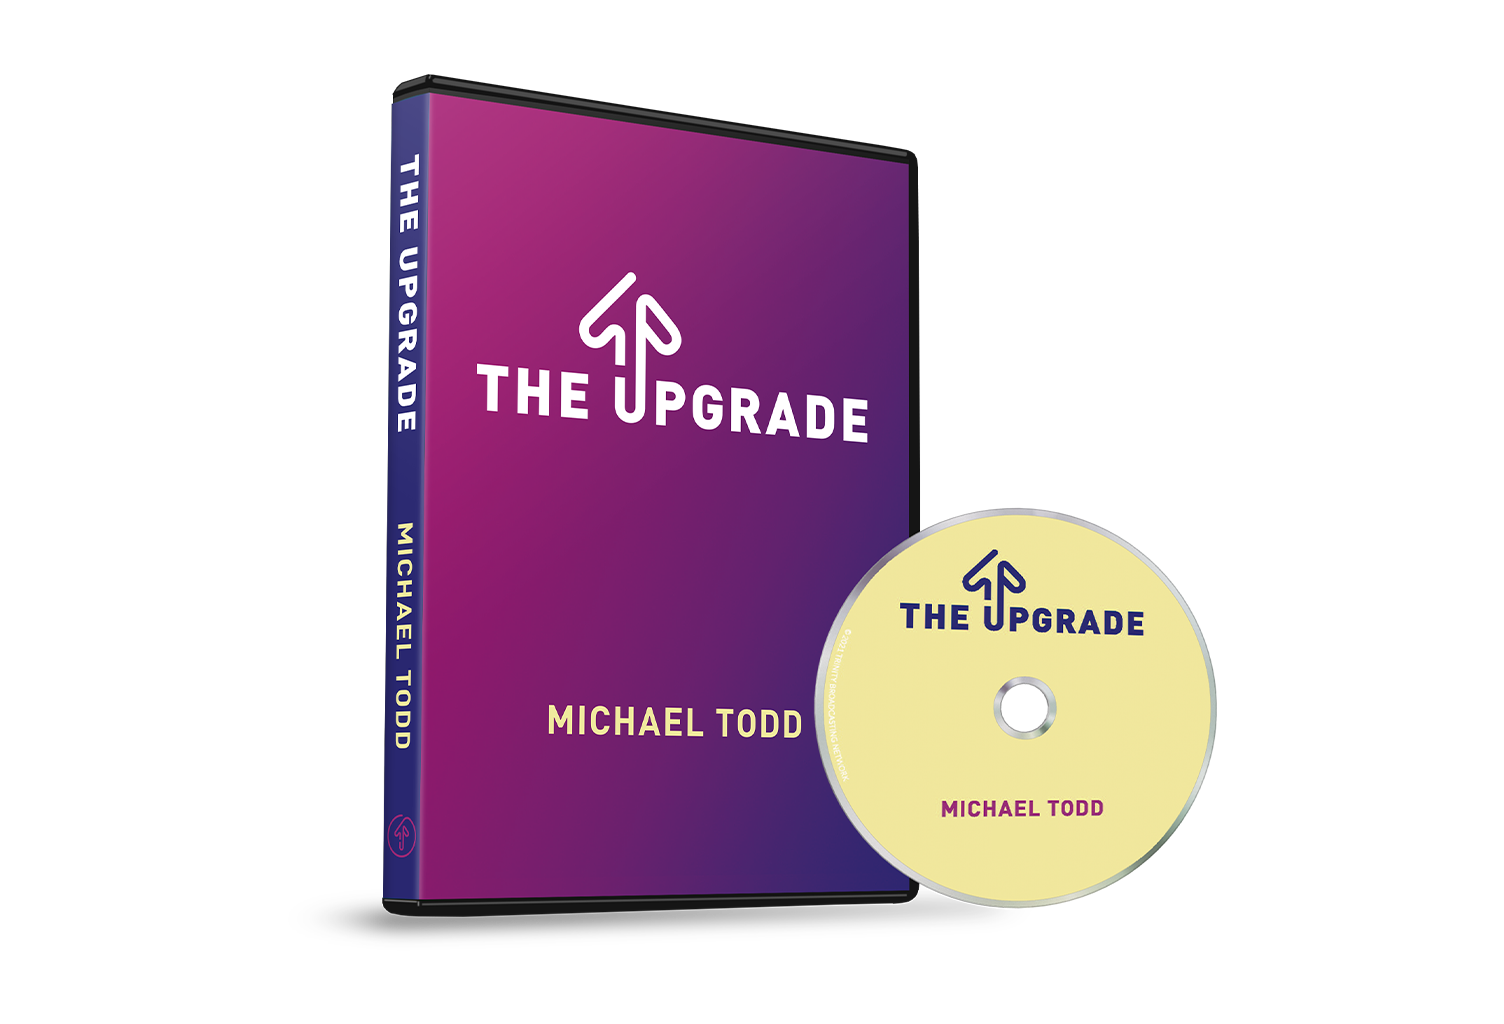 Michael Todd’s five-part teaching series, The Upgrade on TBN